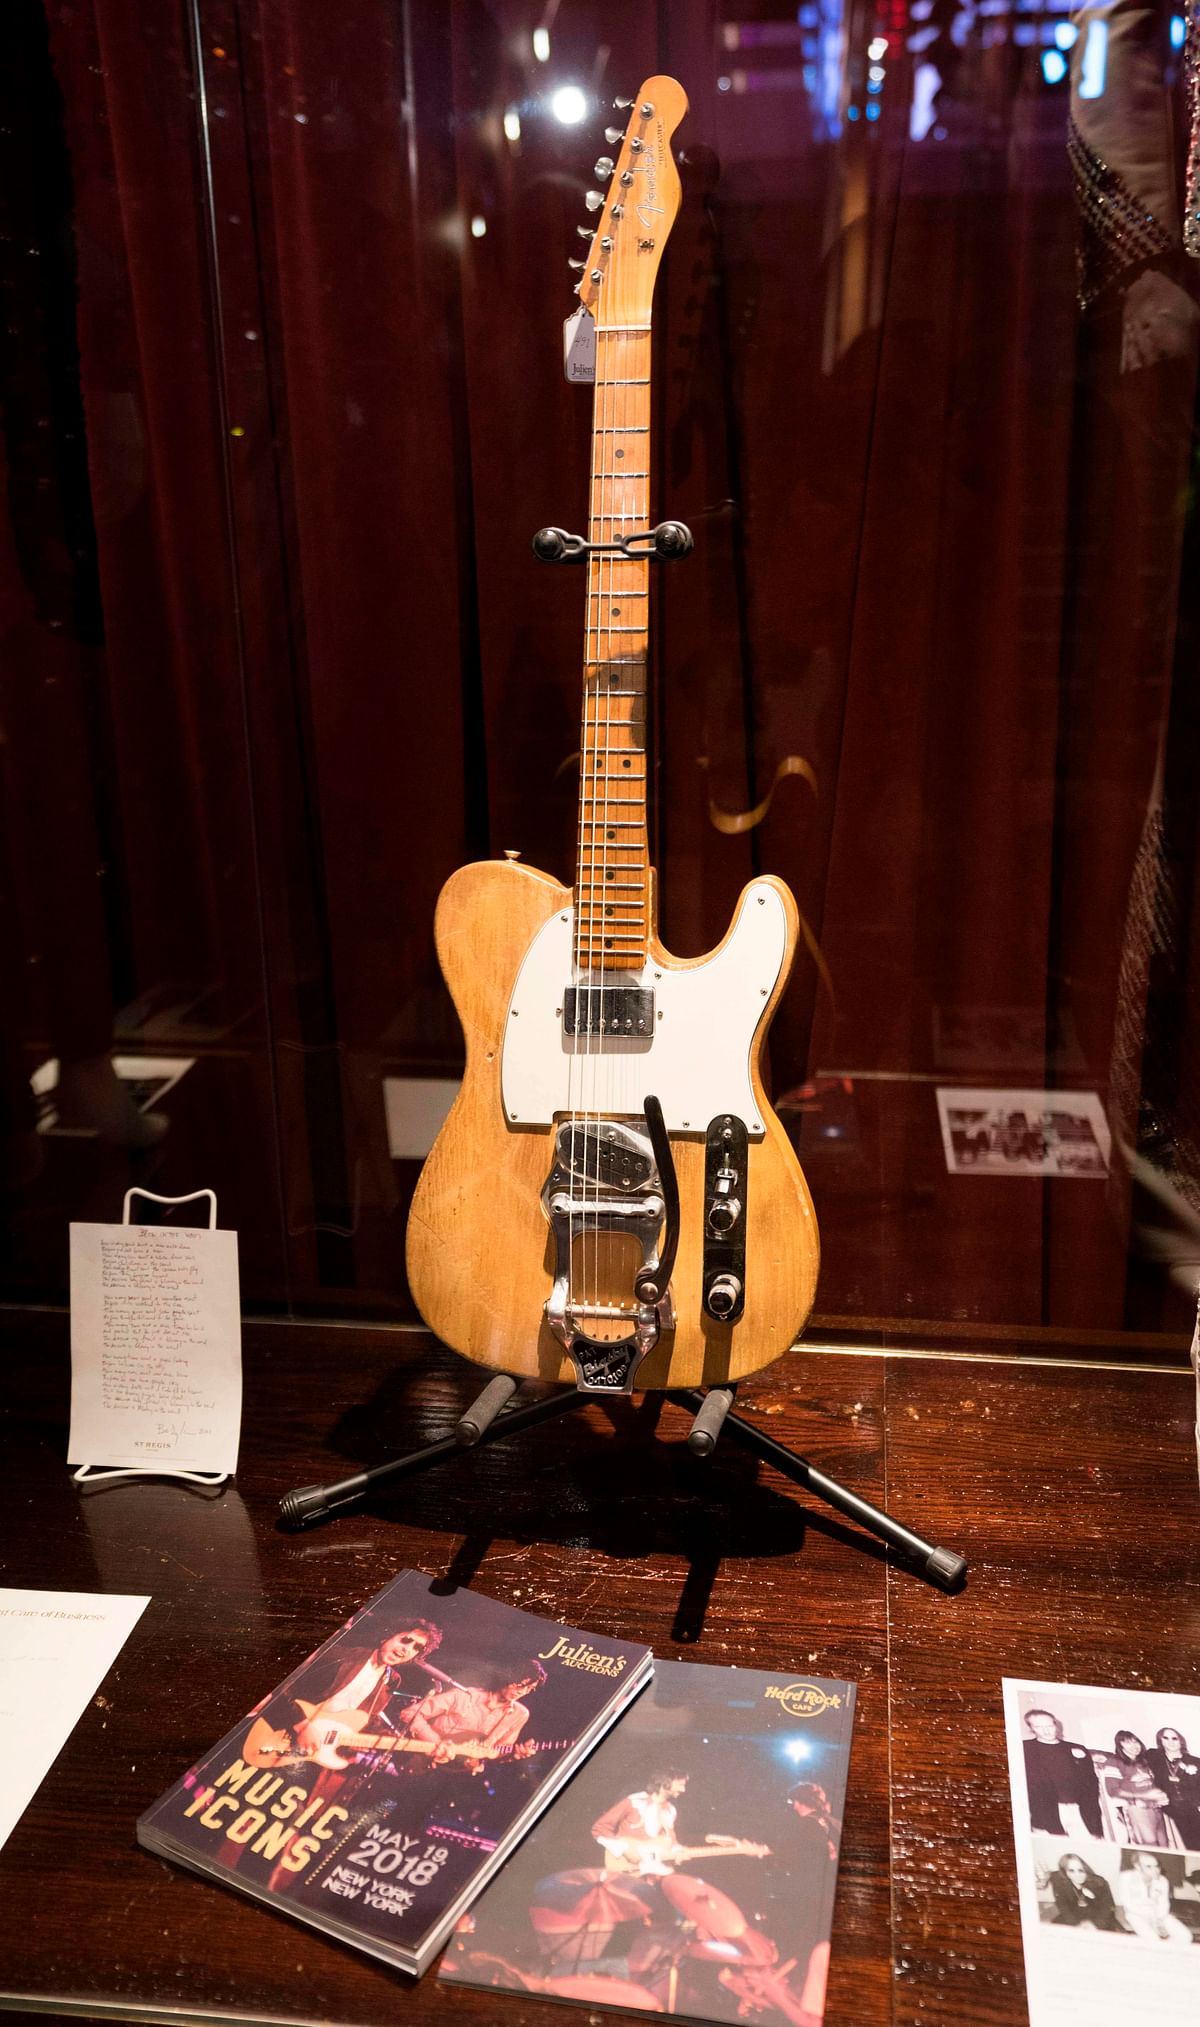 A Bob Dylan/Robbie Robertson 1965 Fender Telecaster guitar is displayed along with other items during a media preview on 14 May 2018 in New York. Photo: AFP